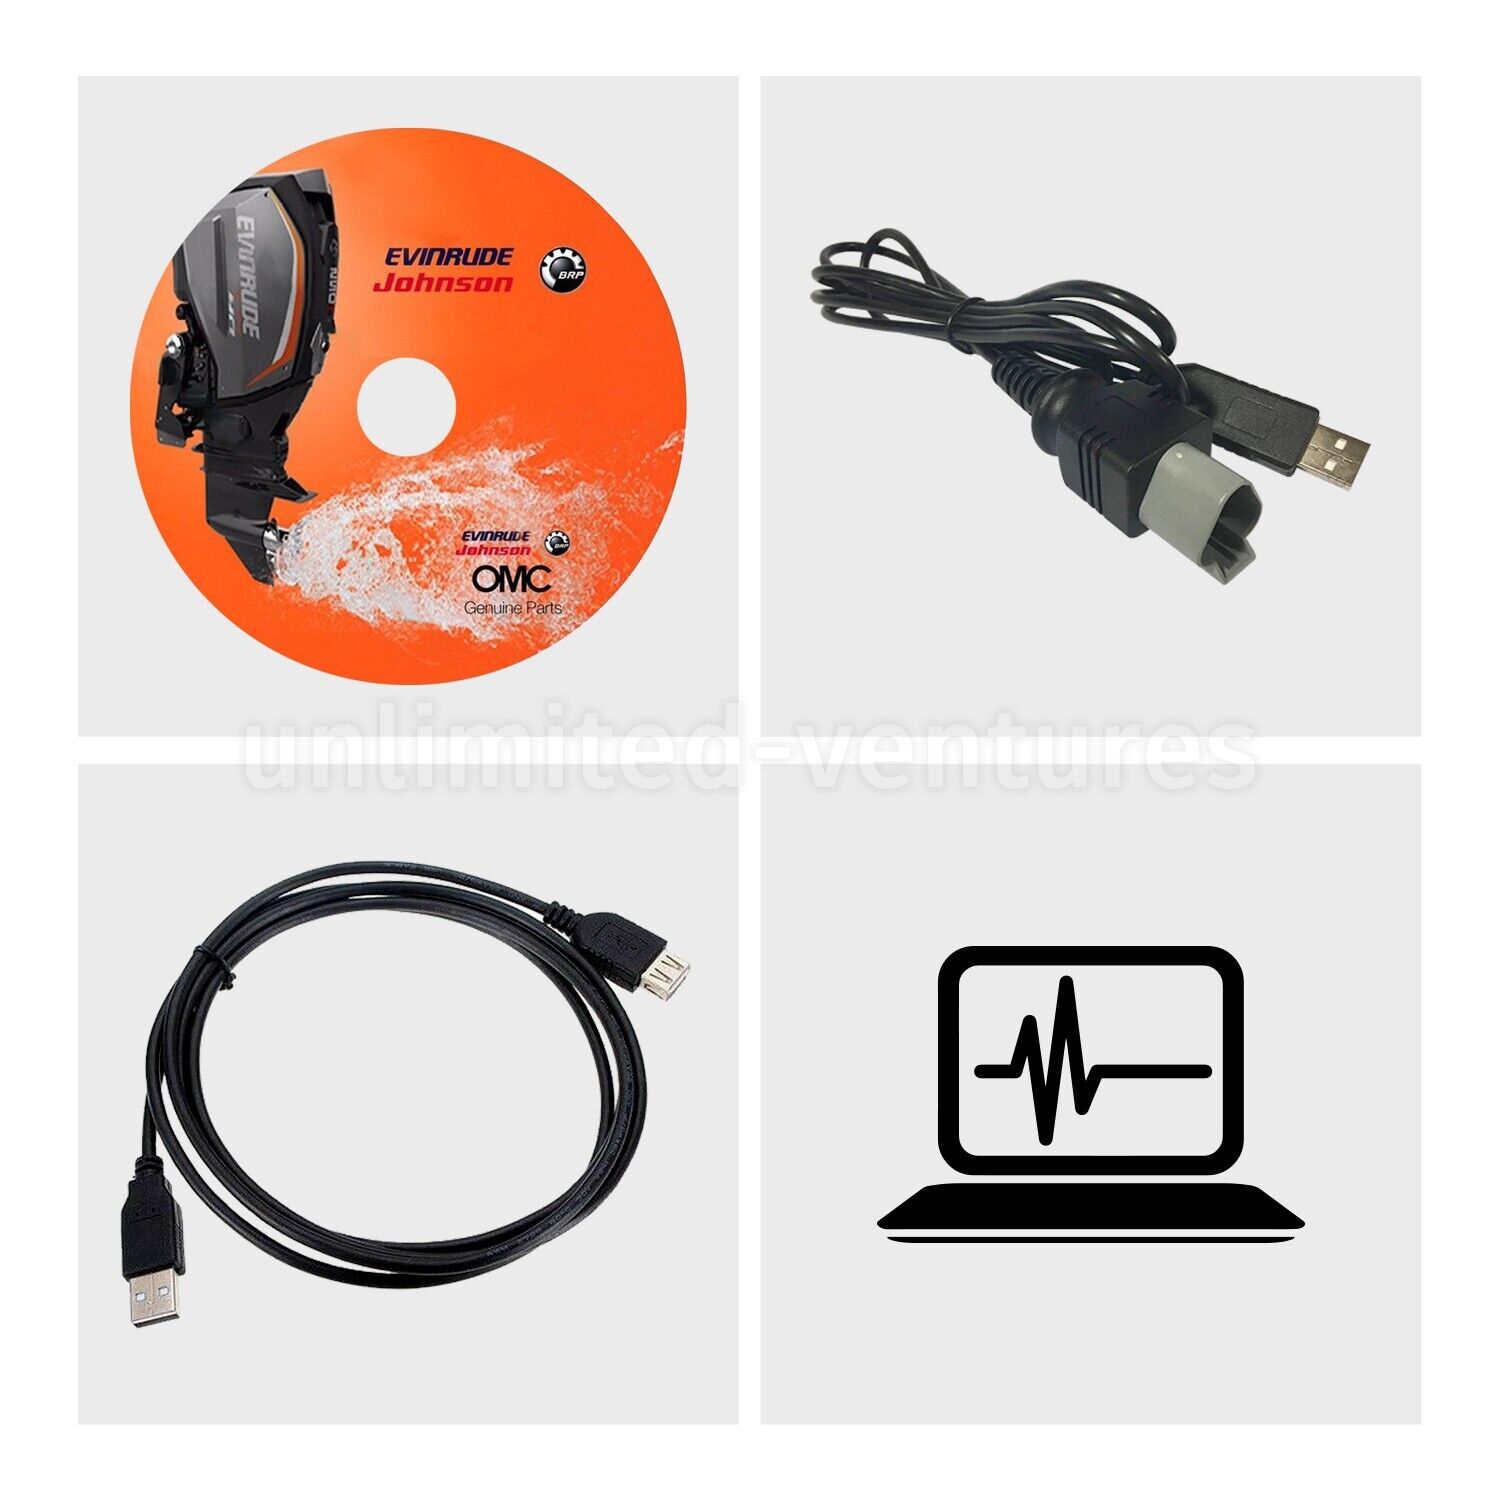 Diagnostic USB tool KIT with chip FT232RL for Evinrude E-tec Ficht outboard boat